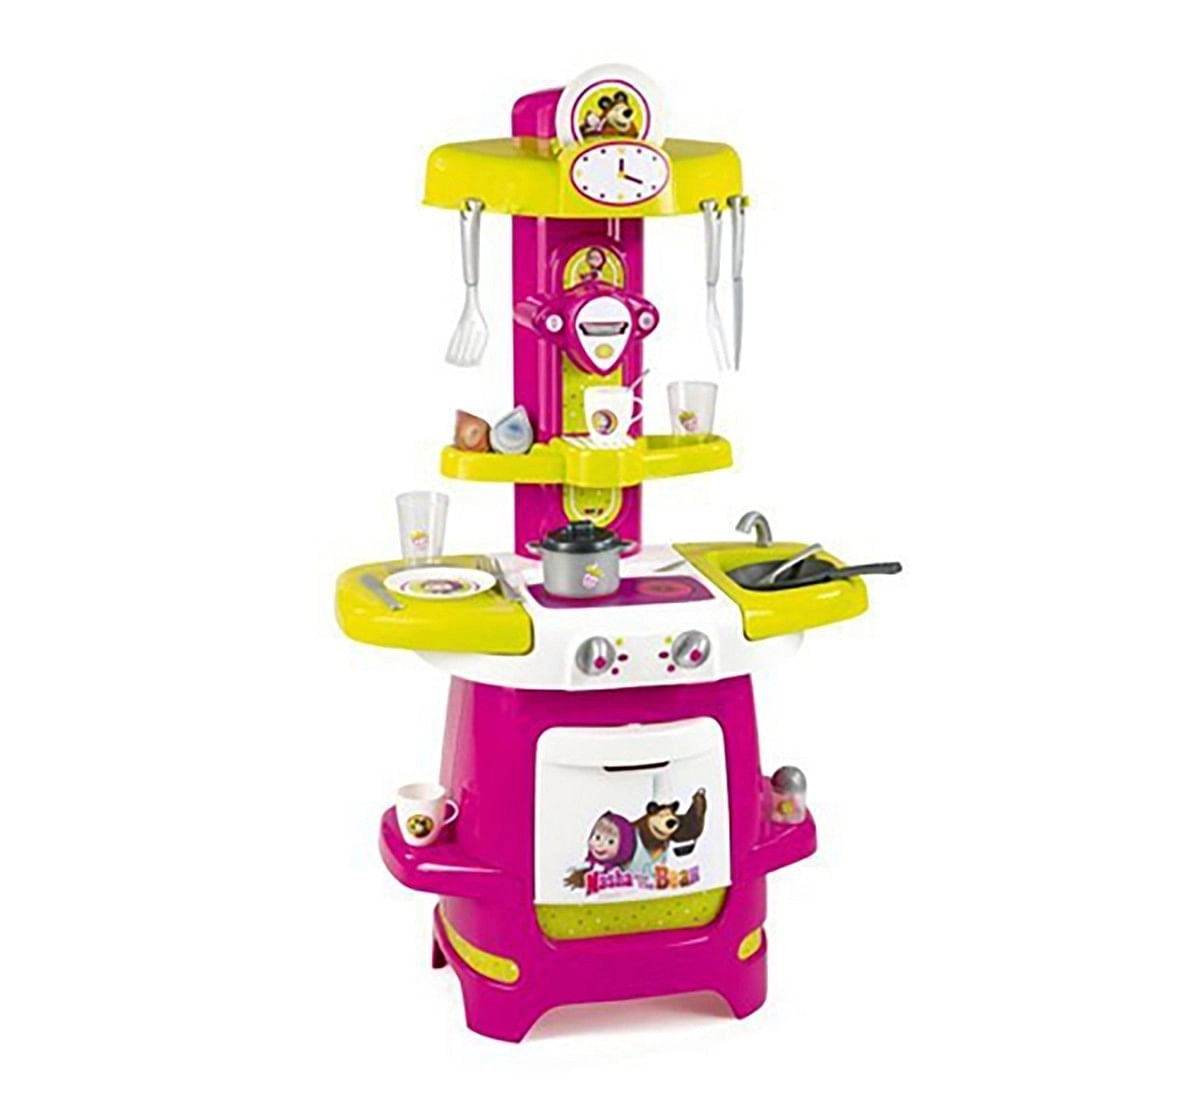 Masha And The Bear Smoby Masha Cooky Kitchen Kitchen Sets & Appliances for age 3Y+ 